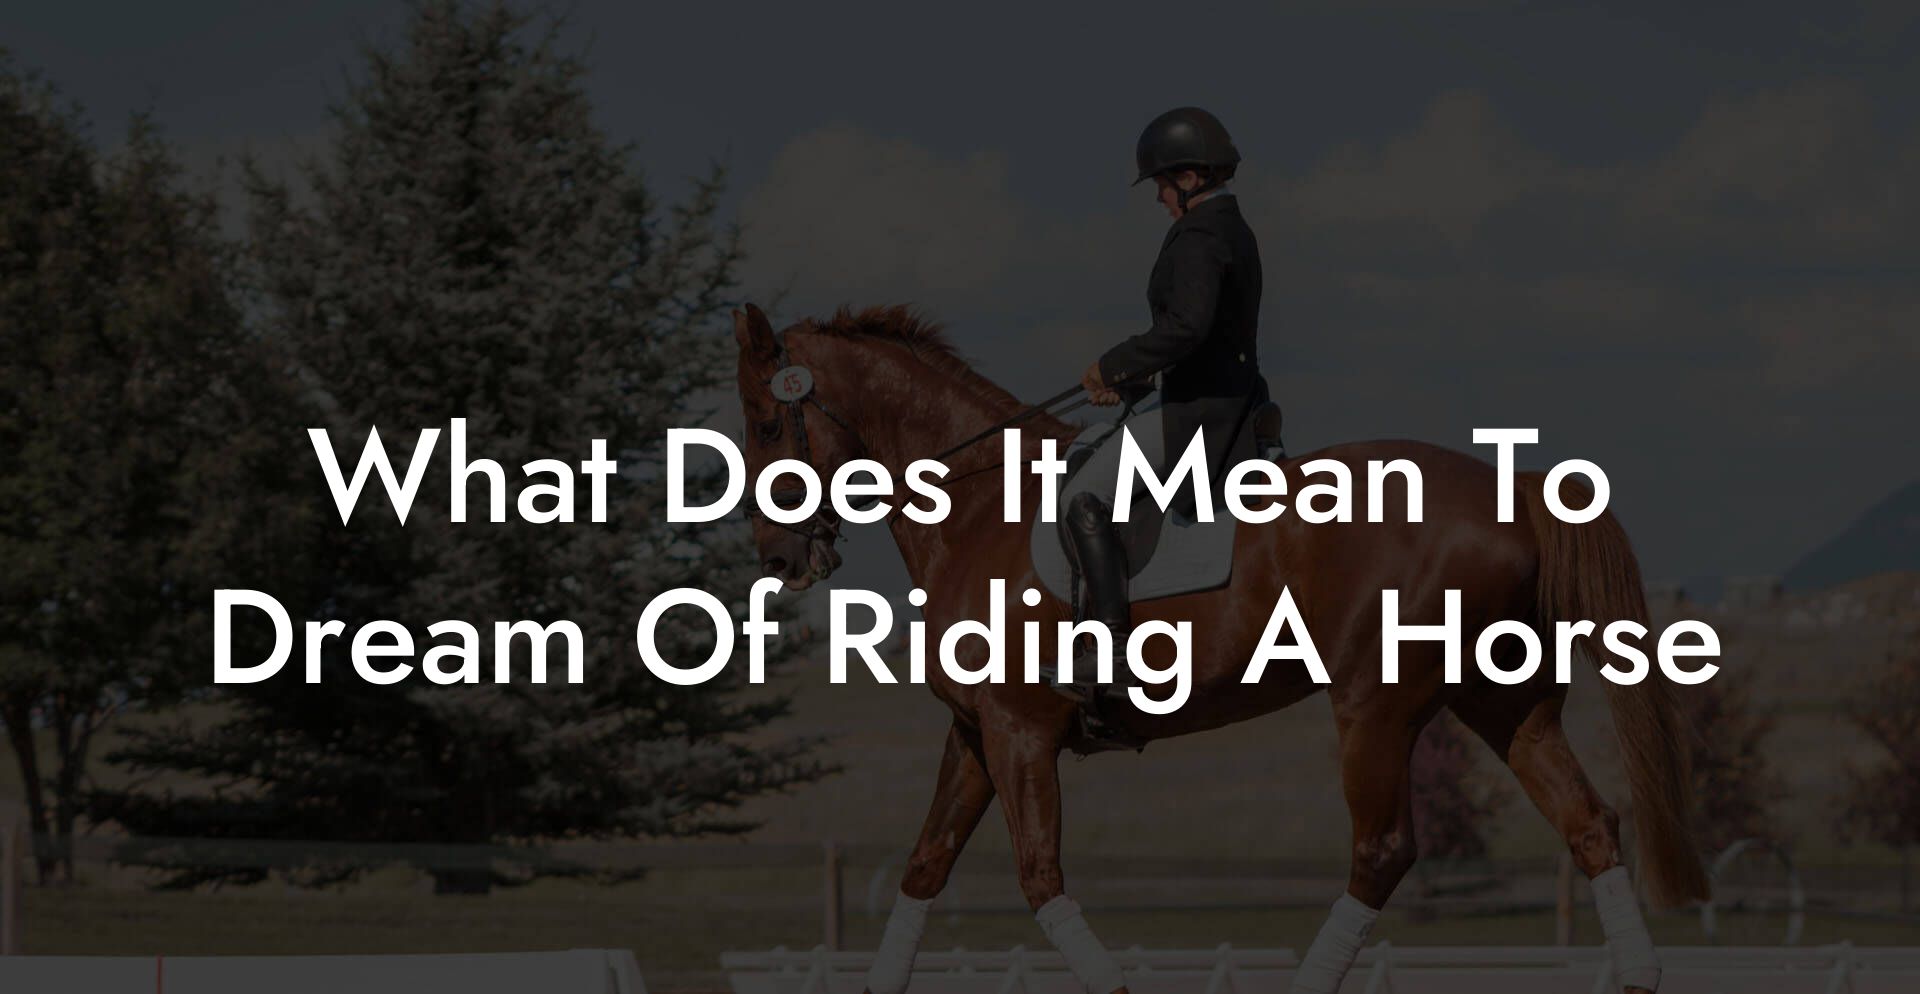 What Does It Mean To Dream Of Riding A Horse